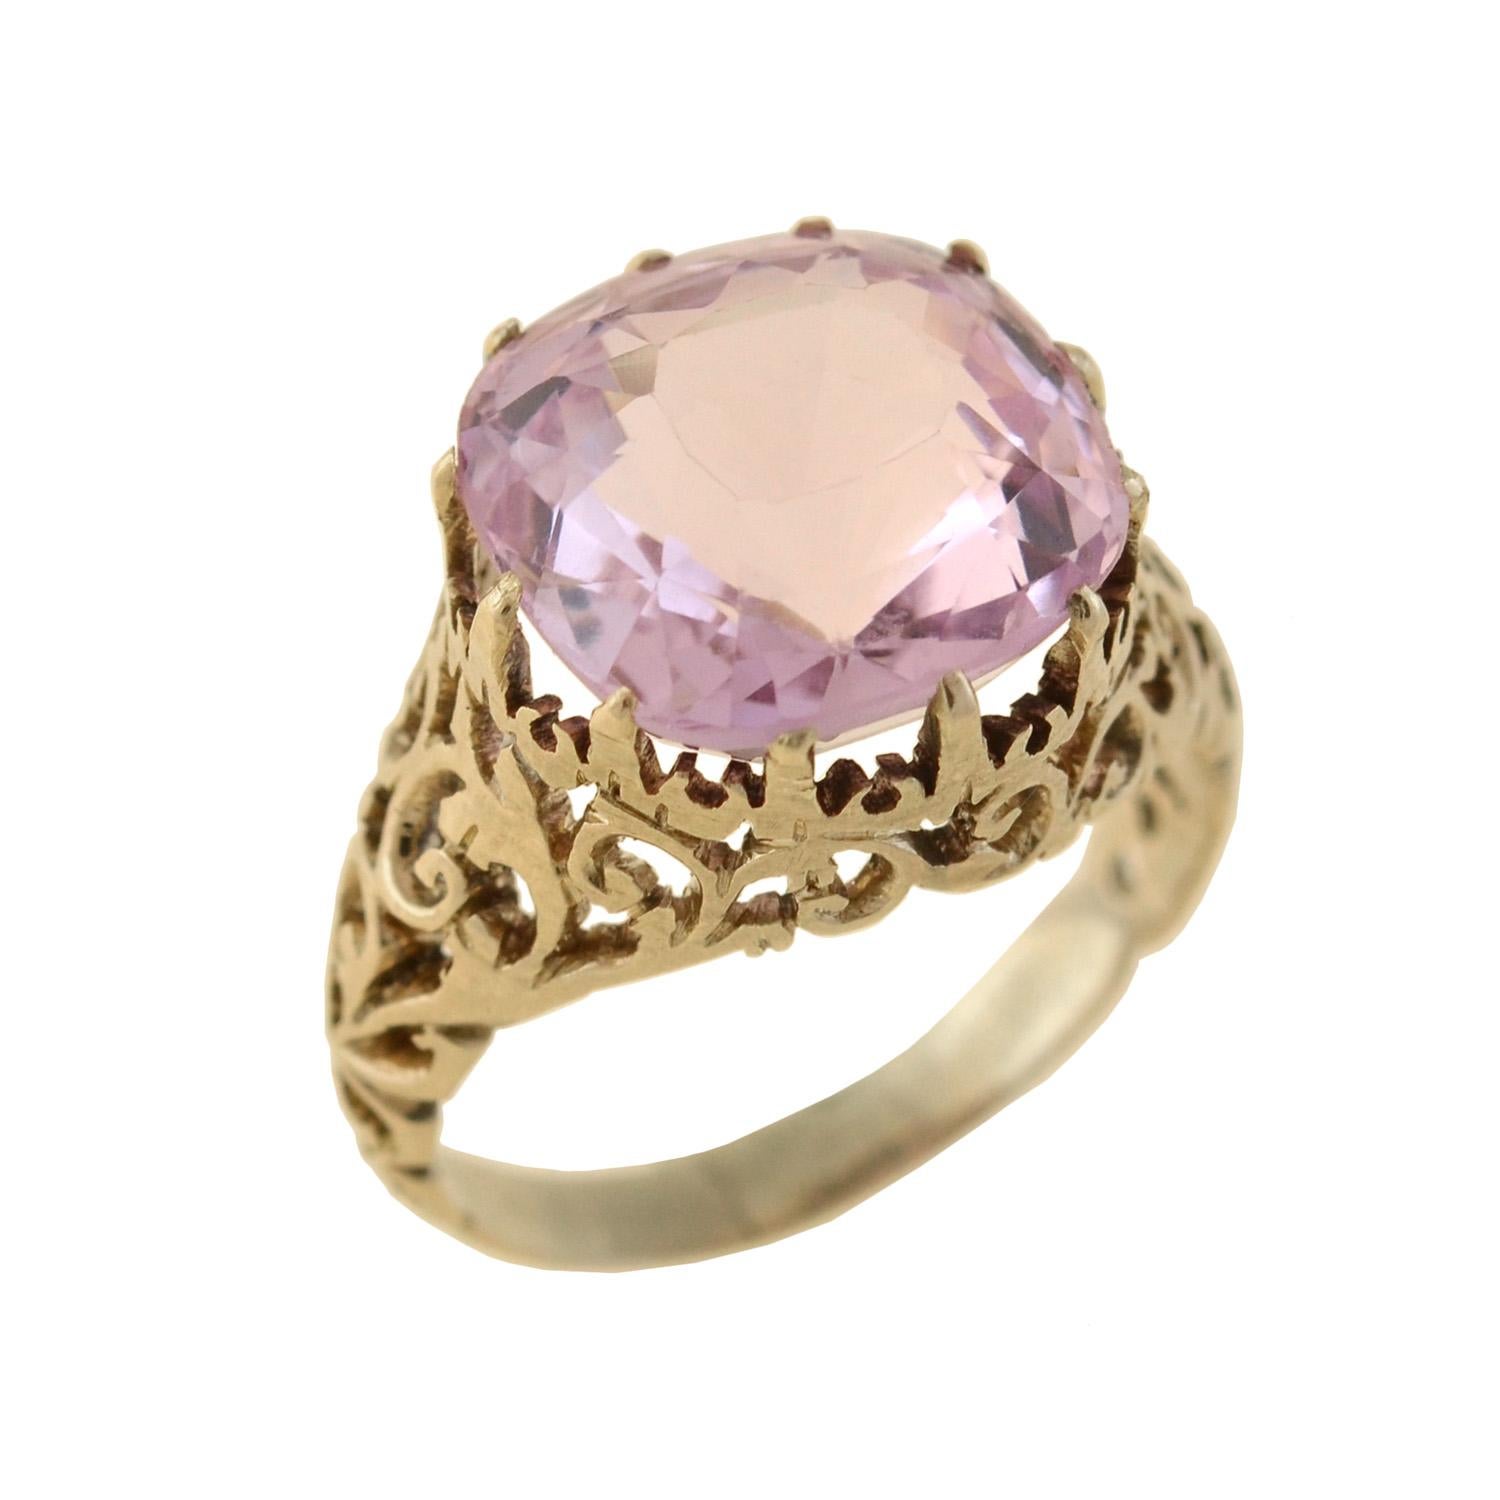 Early Victorian Victorian GIA Certified Natural Ceylon Pink Sapphire Ring 11.67 Carat